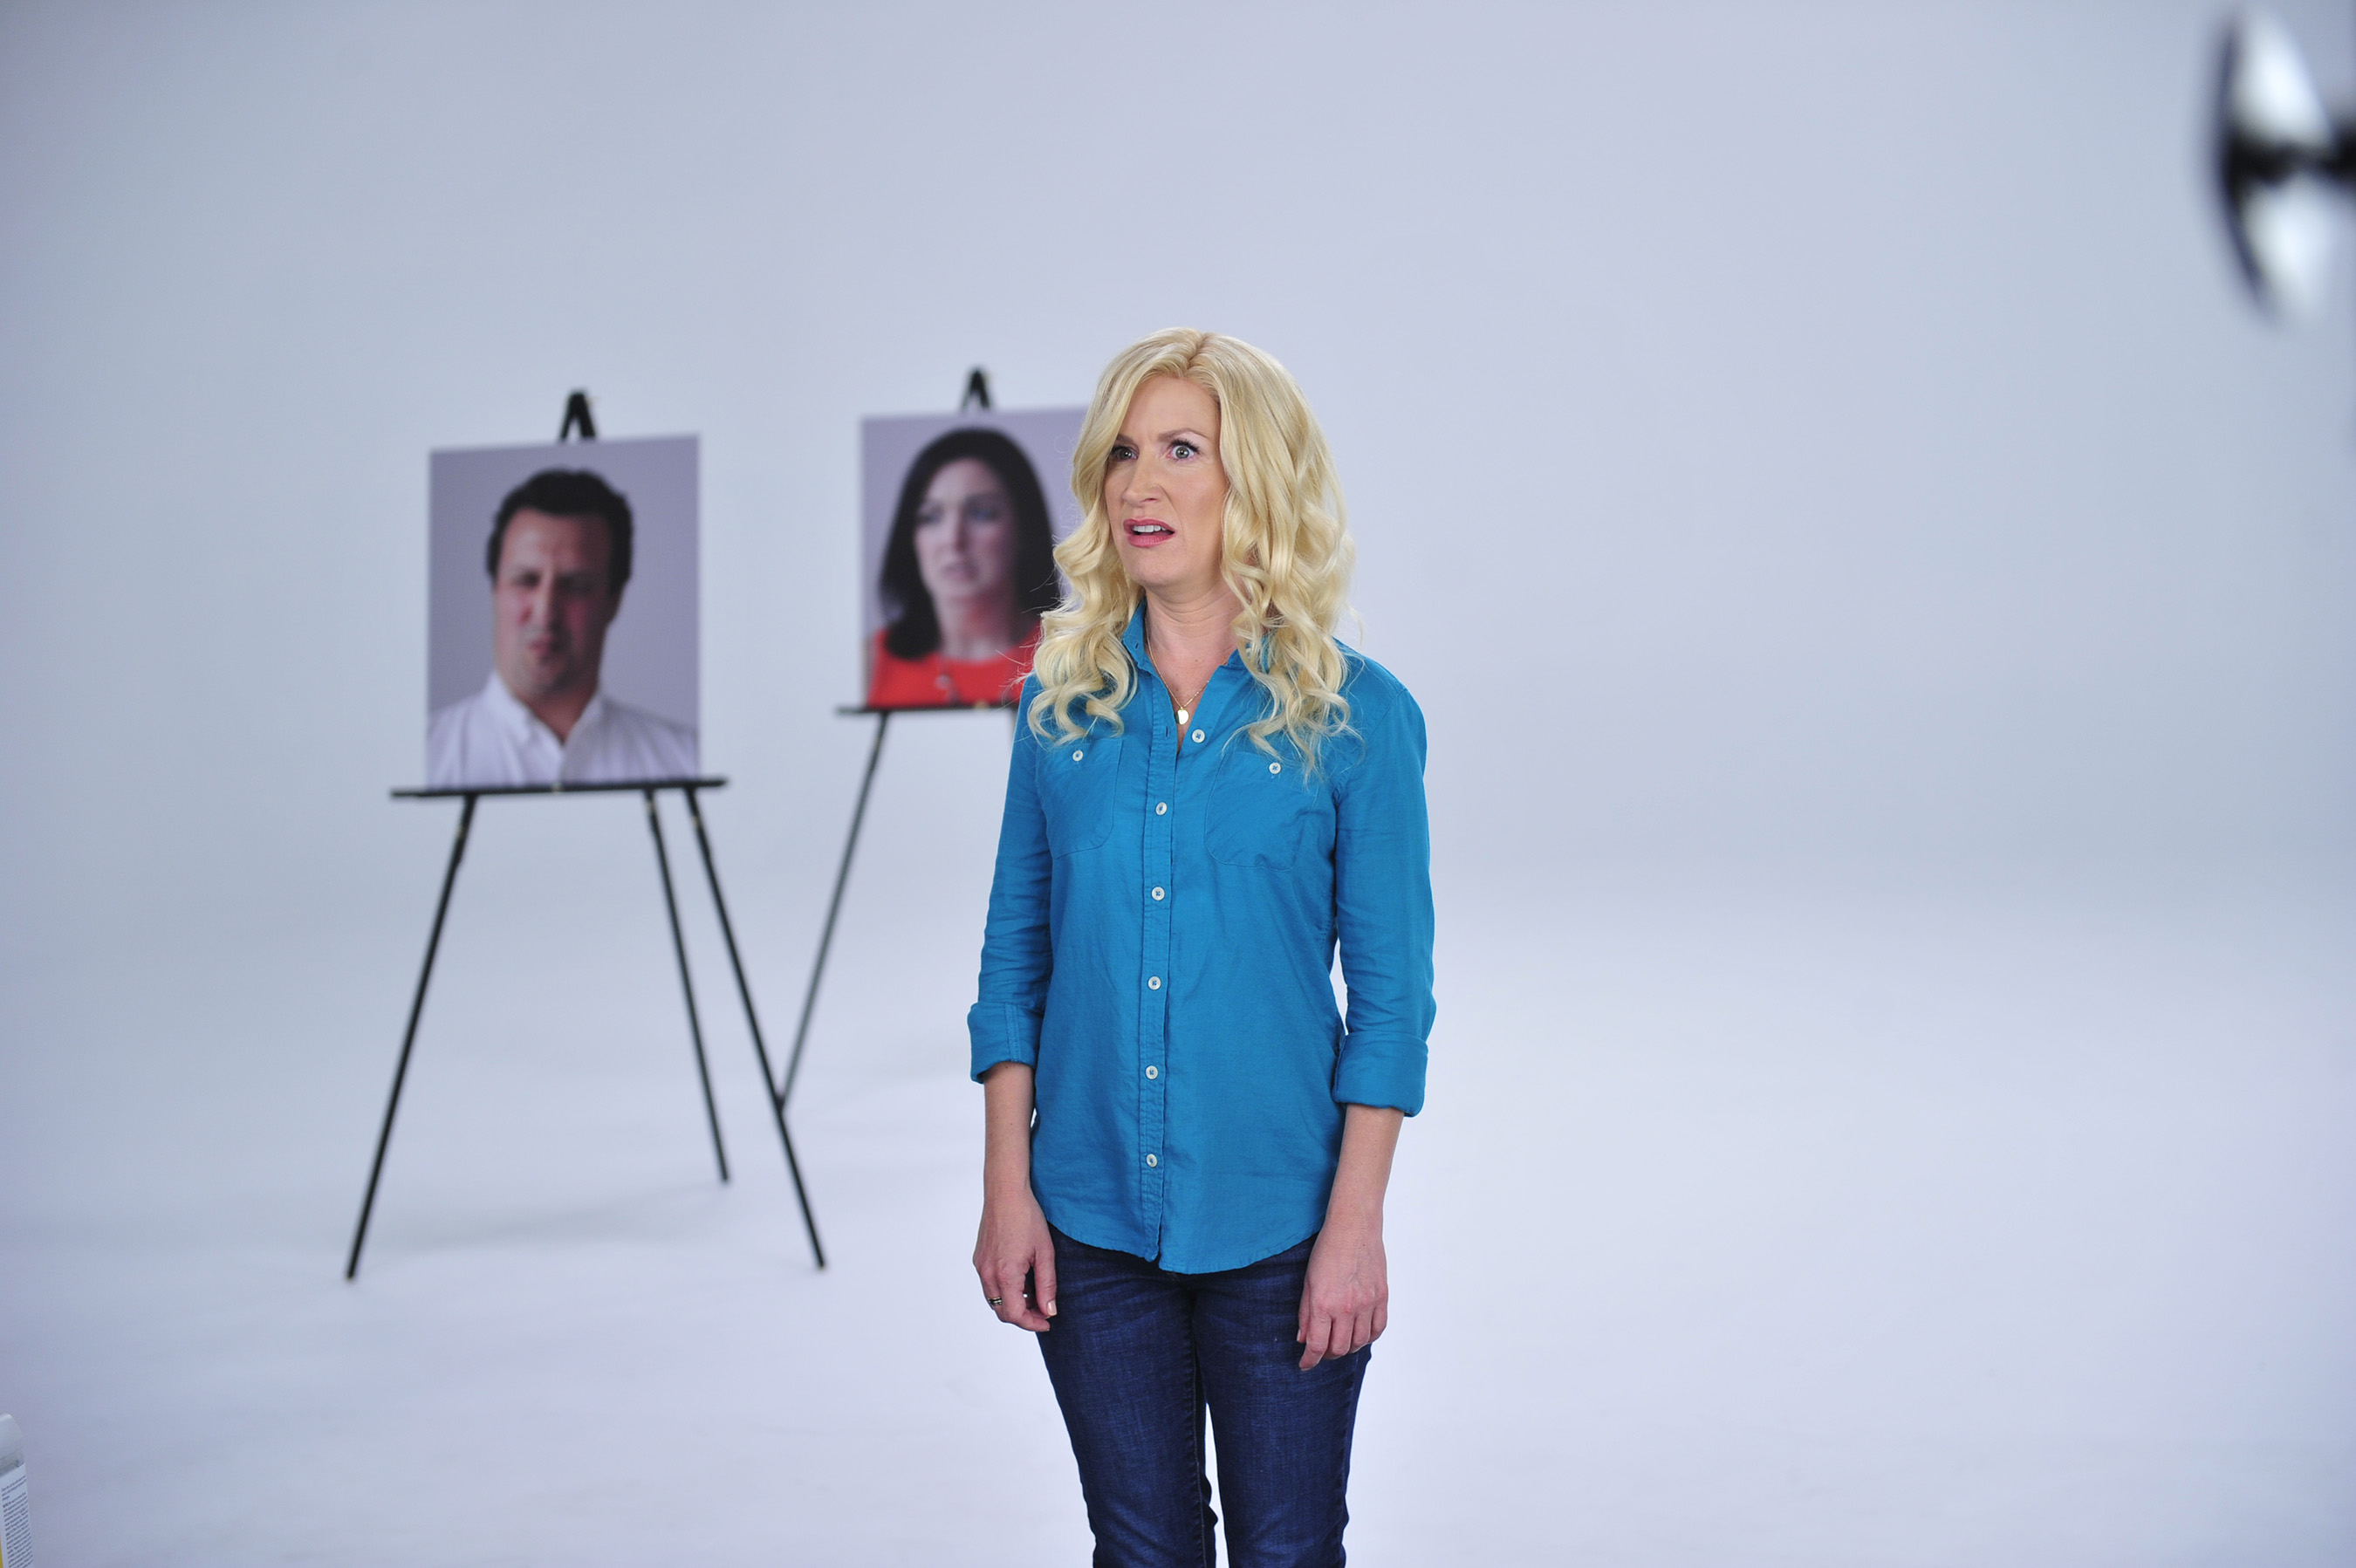 Actress Angela Kinsey reveals her own Stank Face while shooting “Stop Stank Face,” a public service announcement with Tidy Cats® aimed to drive awareness of the devastating effects of Stank Face, the universal expression of disgust caused by litter box odor. The campaign offers cat owners suffering from this horrific condition hope and a cure with Tidy Cats brand litters featuring TidyLock™ Protection.